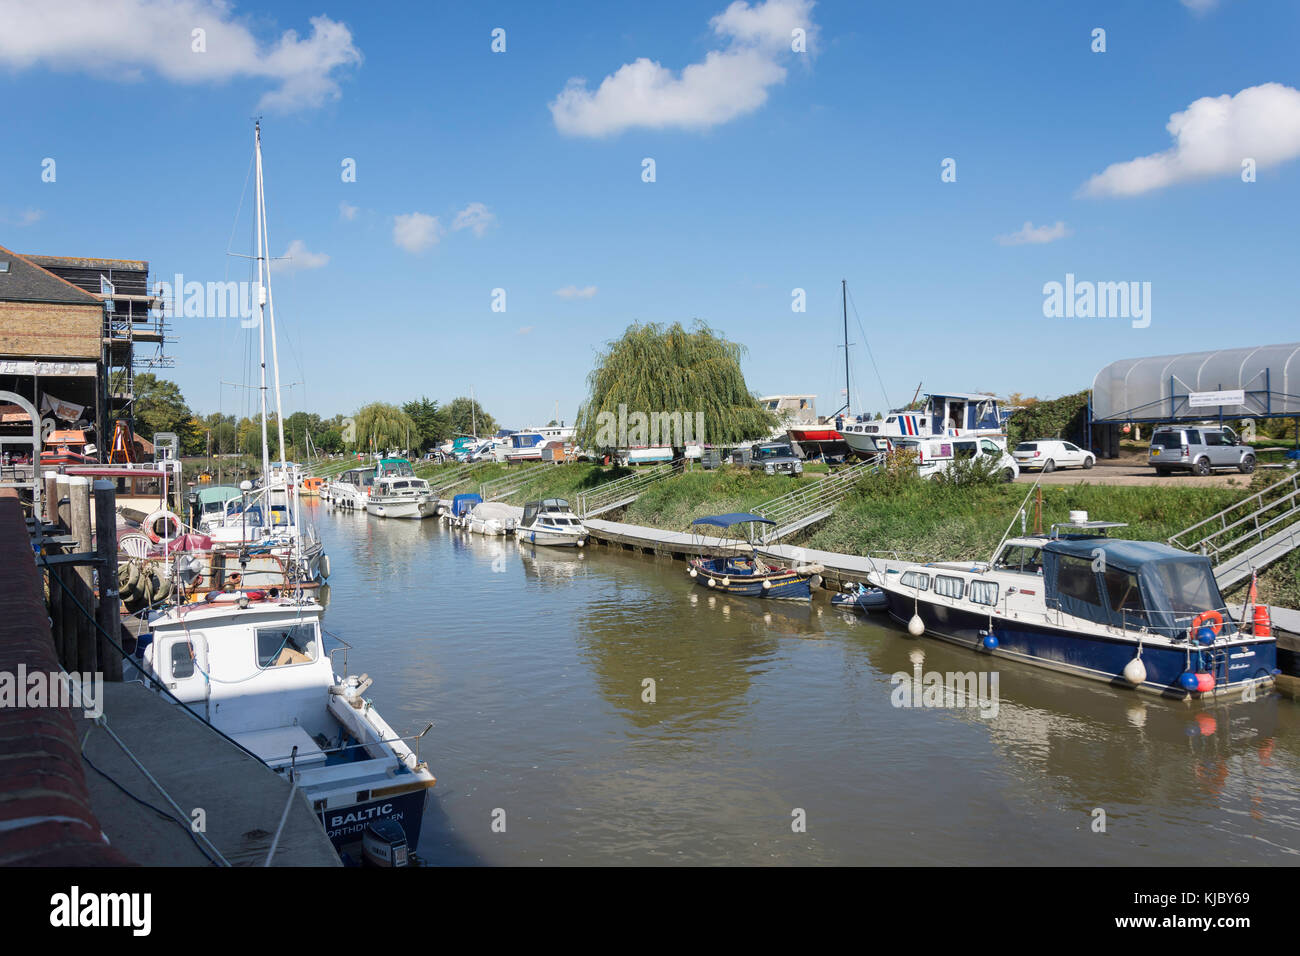 Boats moored on The River Stour, Sandwich. Kent, England, United Kingdom Stock Photo